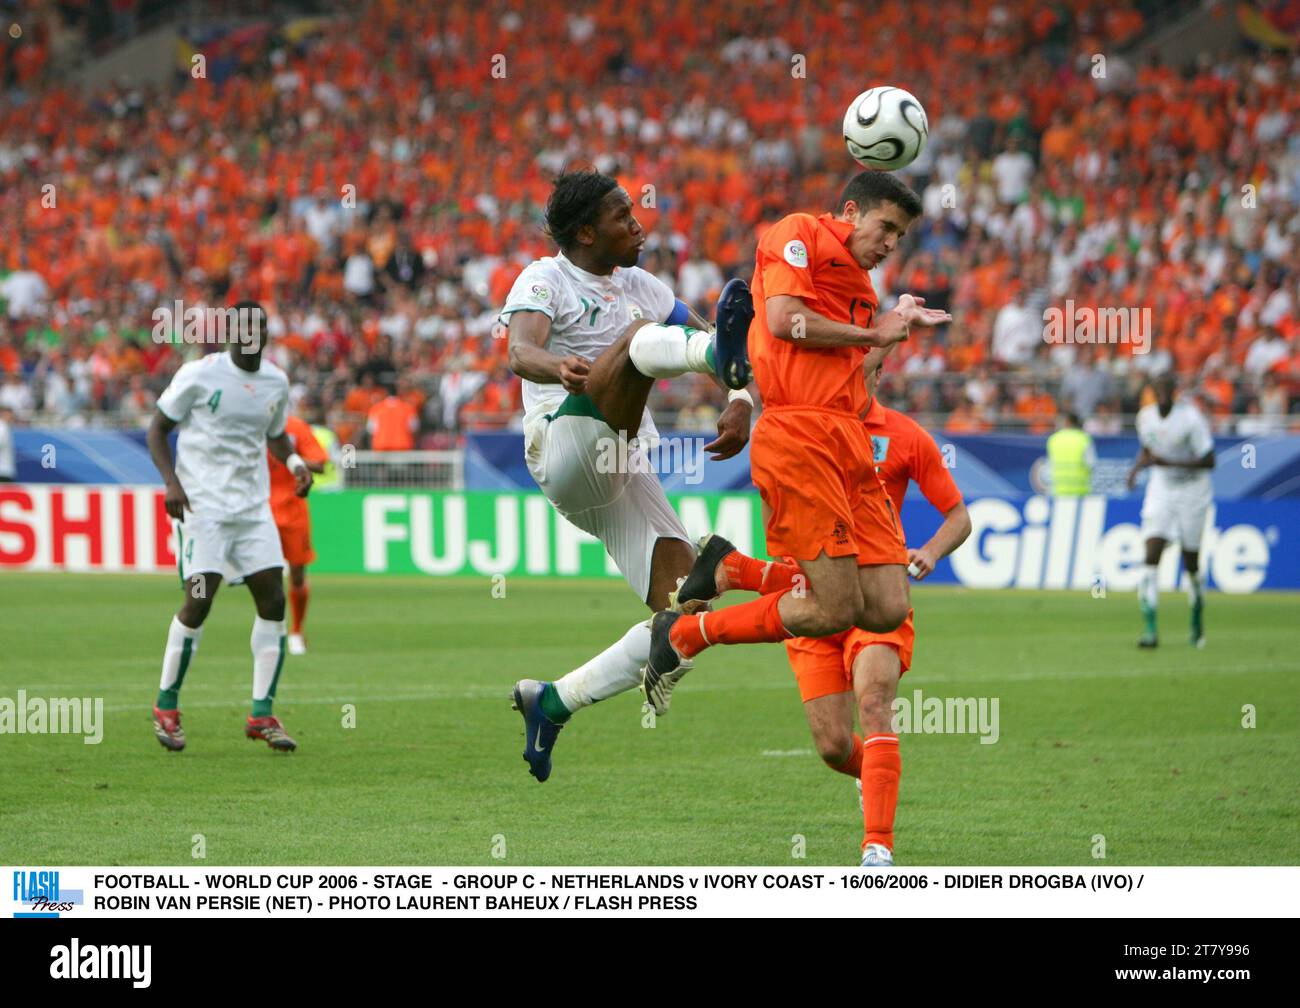 FOOTBALL - WORLD CUP 2006 - STAGE - GROUP C - NETHERLANDS v IVORY COAST - 16/06/2006 - DIDIER DROGBA (IVO) / ROBIN VAN PERSIE (NET) - PHOTO LAURENT BAHEUX / FLASH PRESS Stock Photo